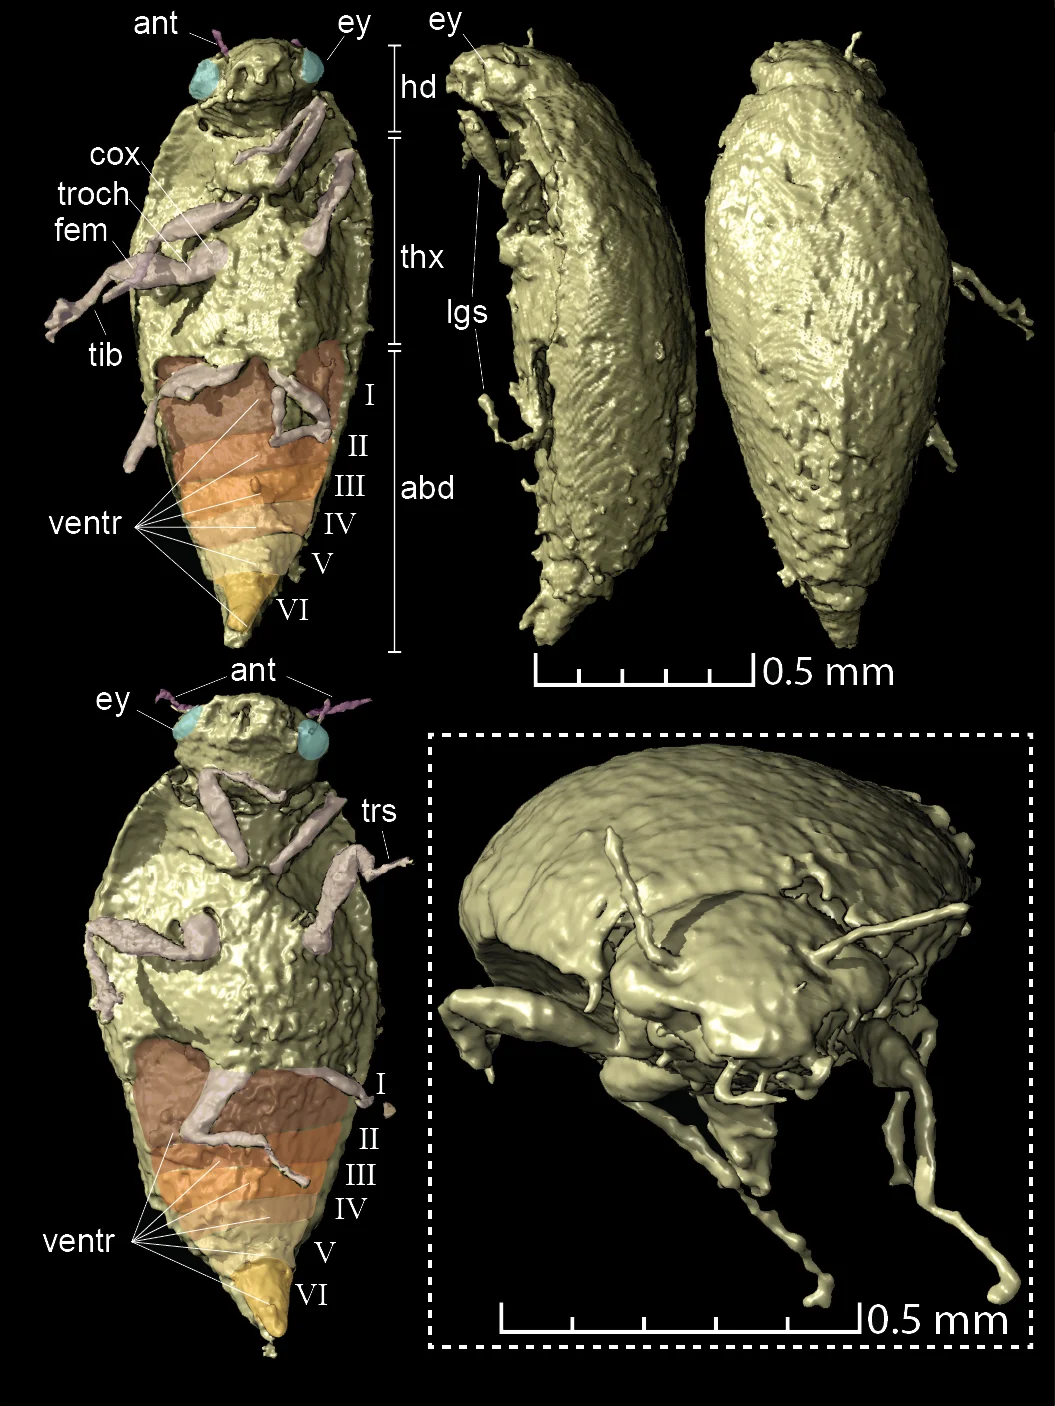 Structure of the preserved beetle